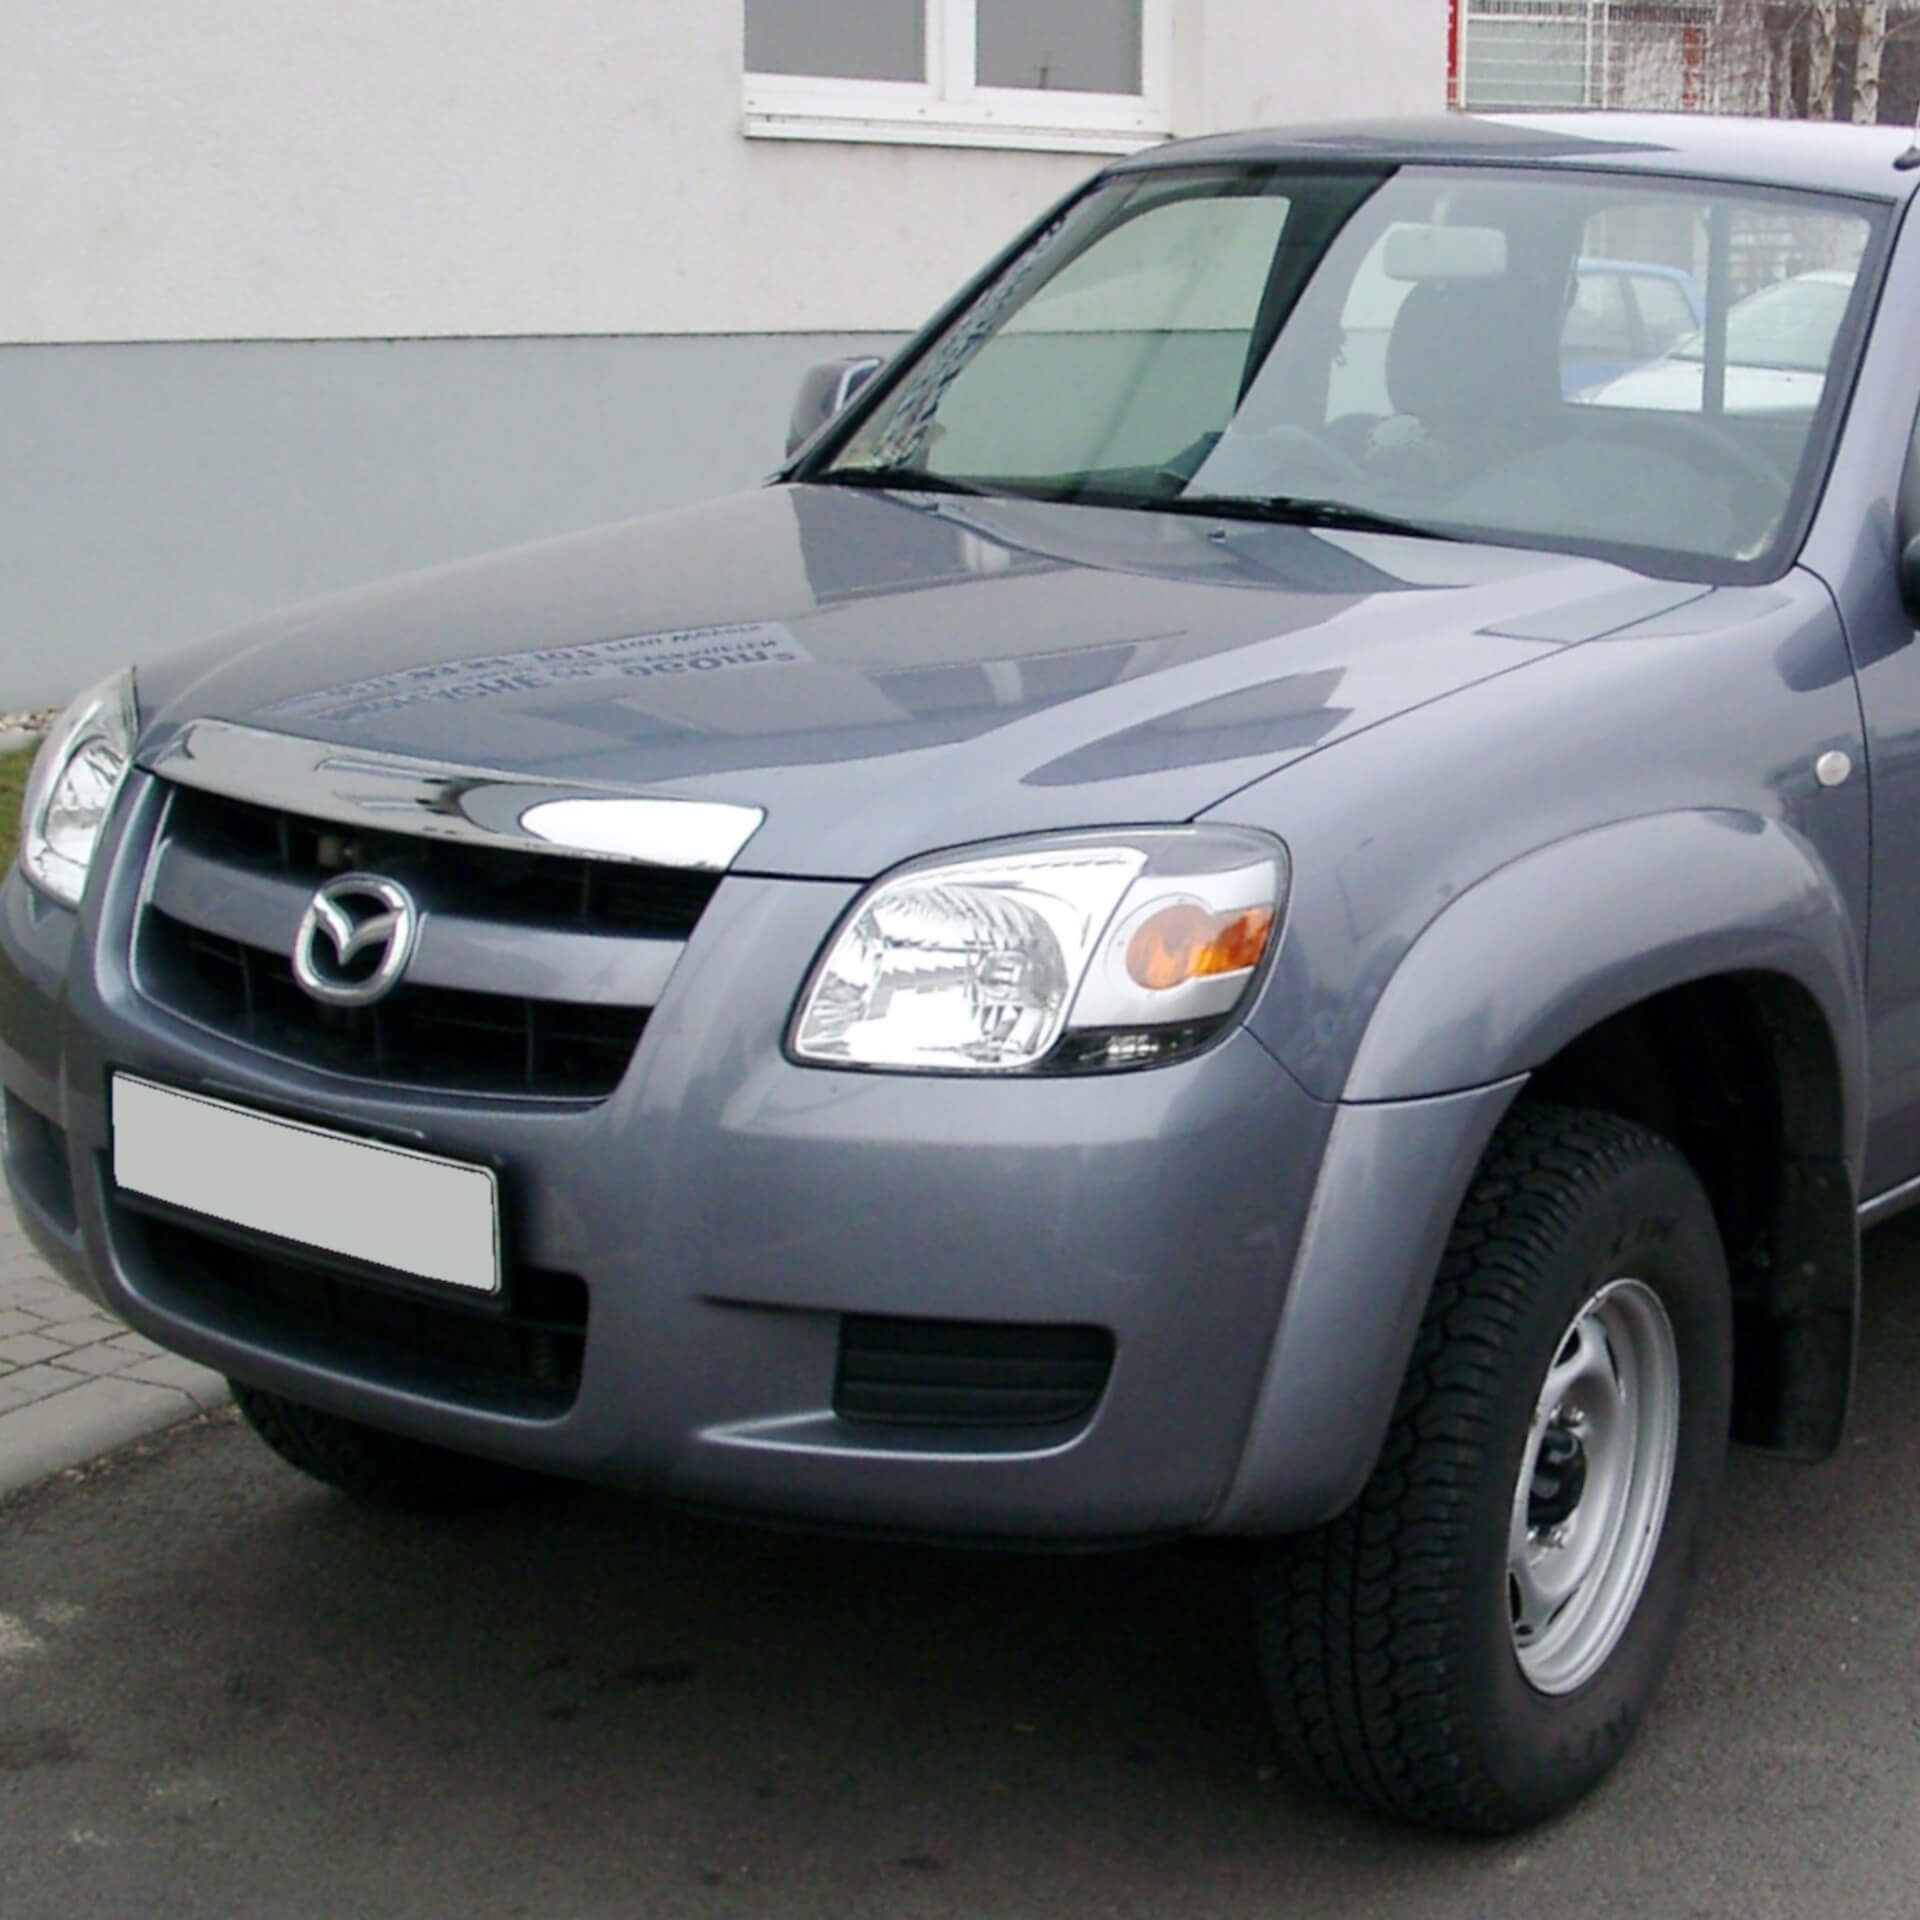 Direct4x4 accessories for Mazda BT-50 vehicles with a photo of the front of a grey Mazda BT-50